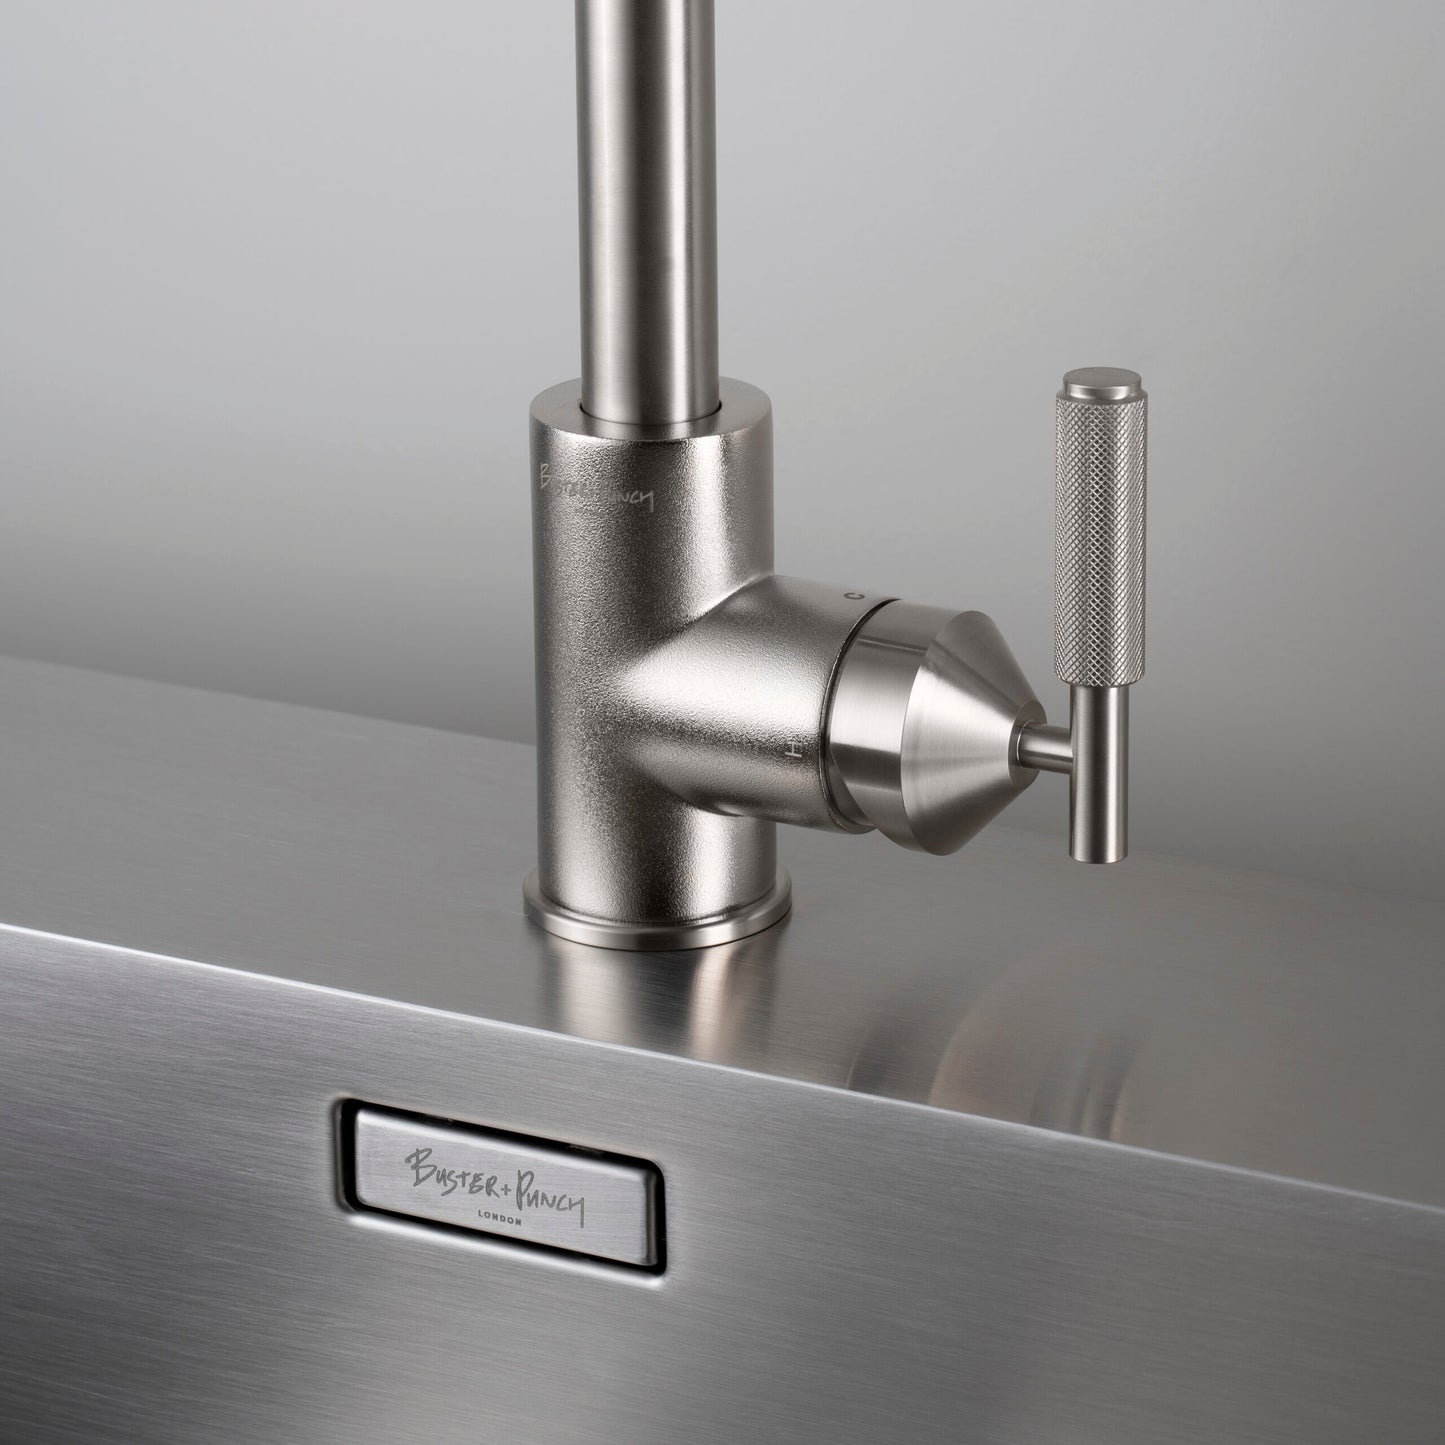 BUSTER AND PUNCH | DUAL-SPRAY PULL-OUT FAUCET / CROSS - $975-$1,125